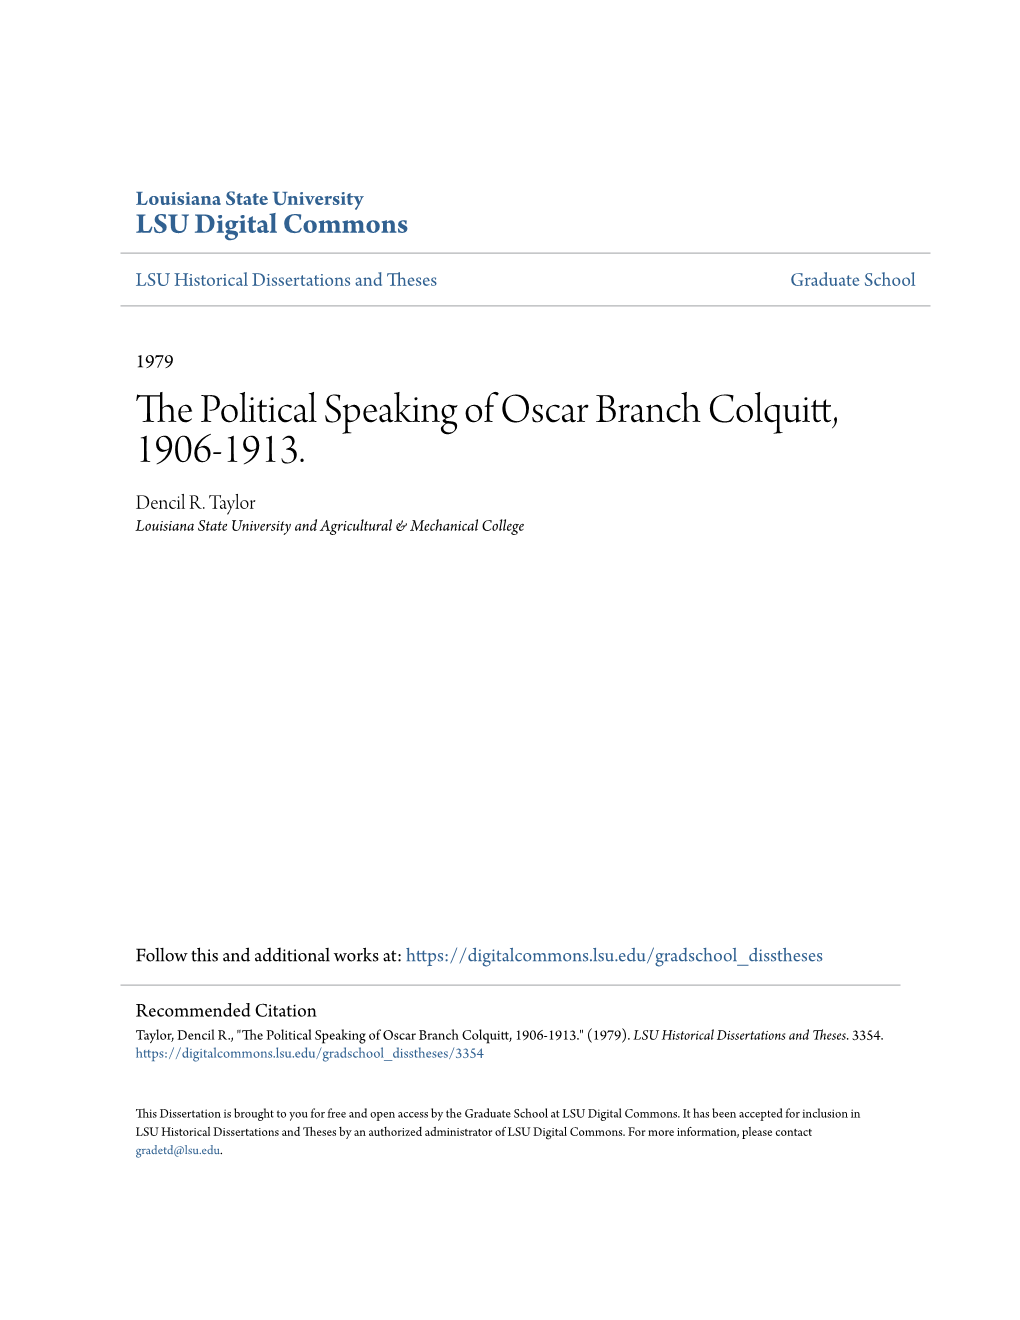 The Political Speaking of Oscar Branch Colquitt, 1906-1913